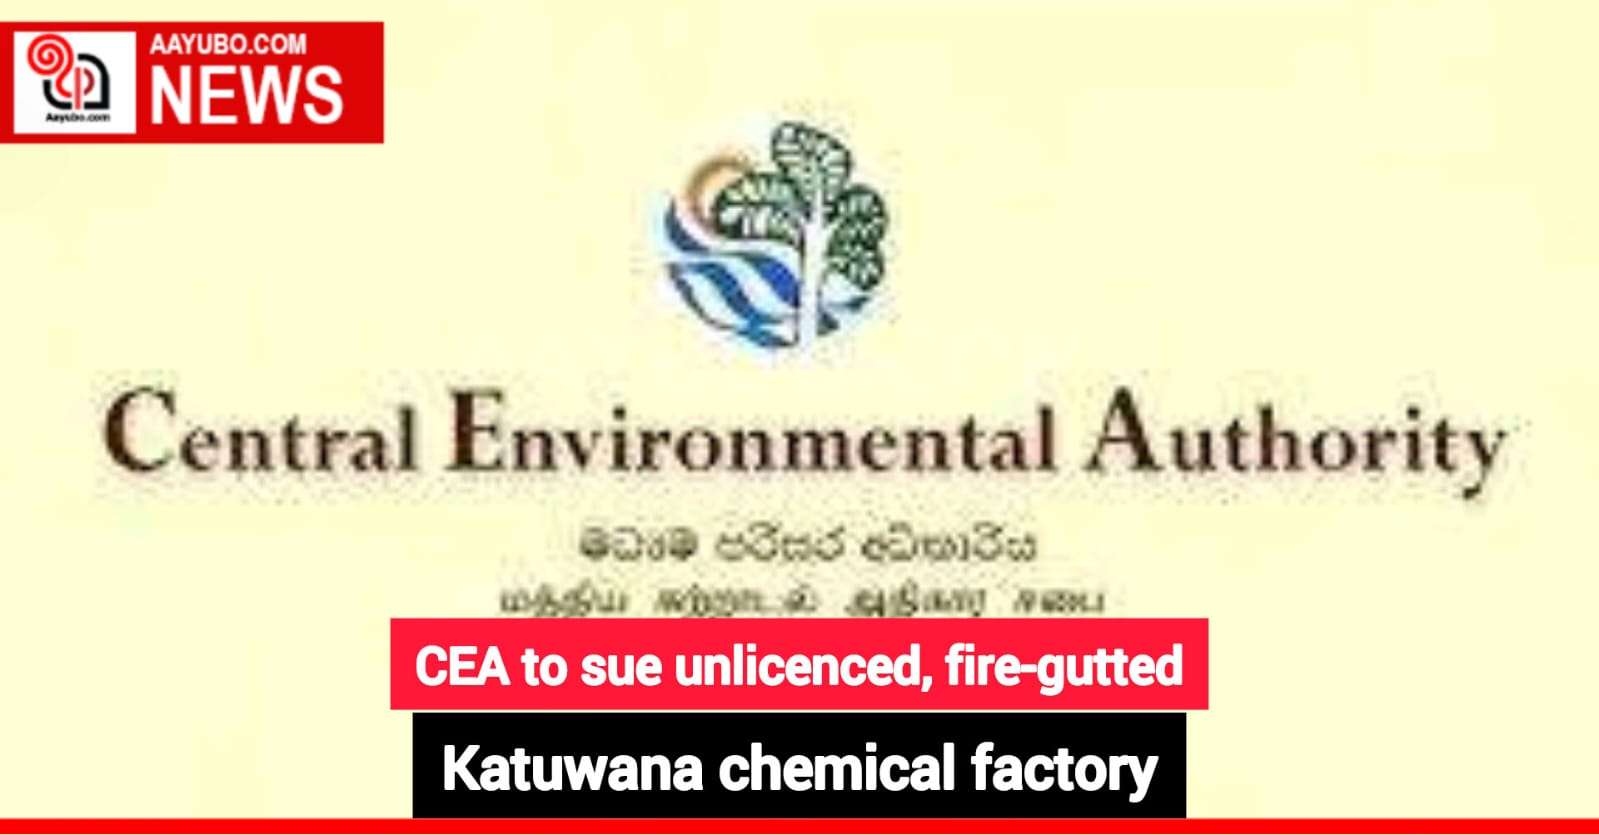 CEA to sue unlicenced, fire-gutted Katuwana chemical factory